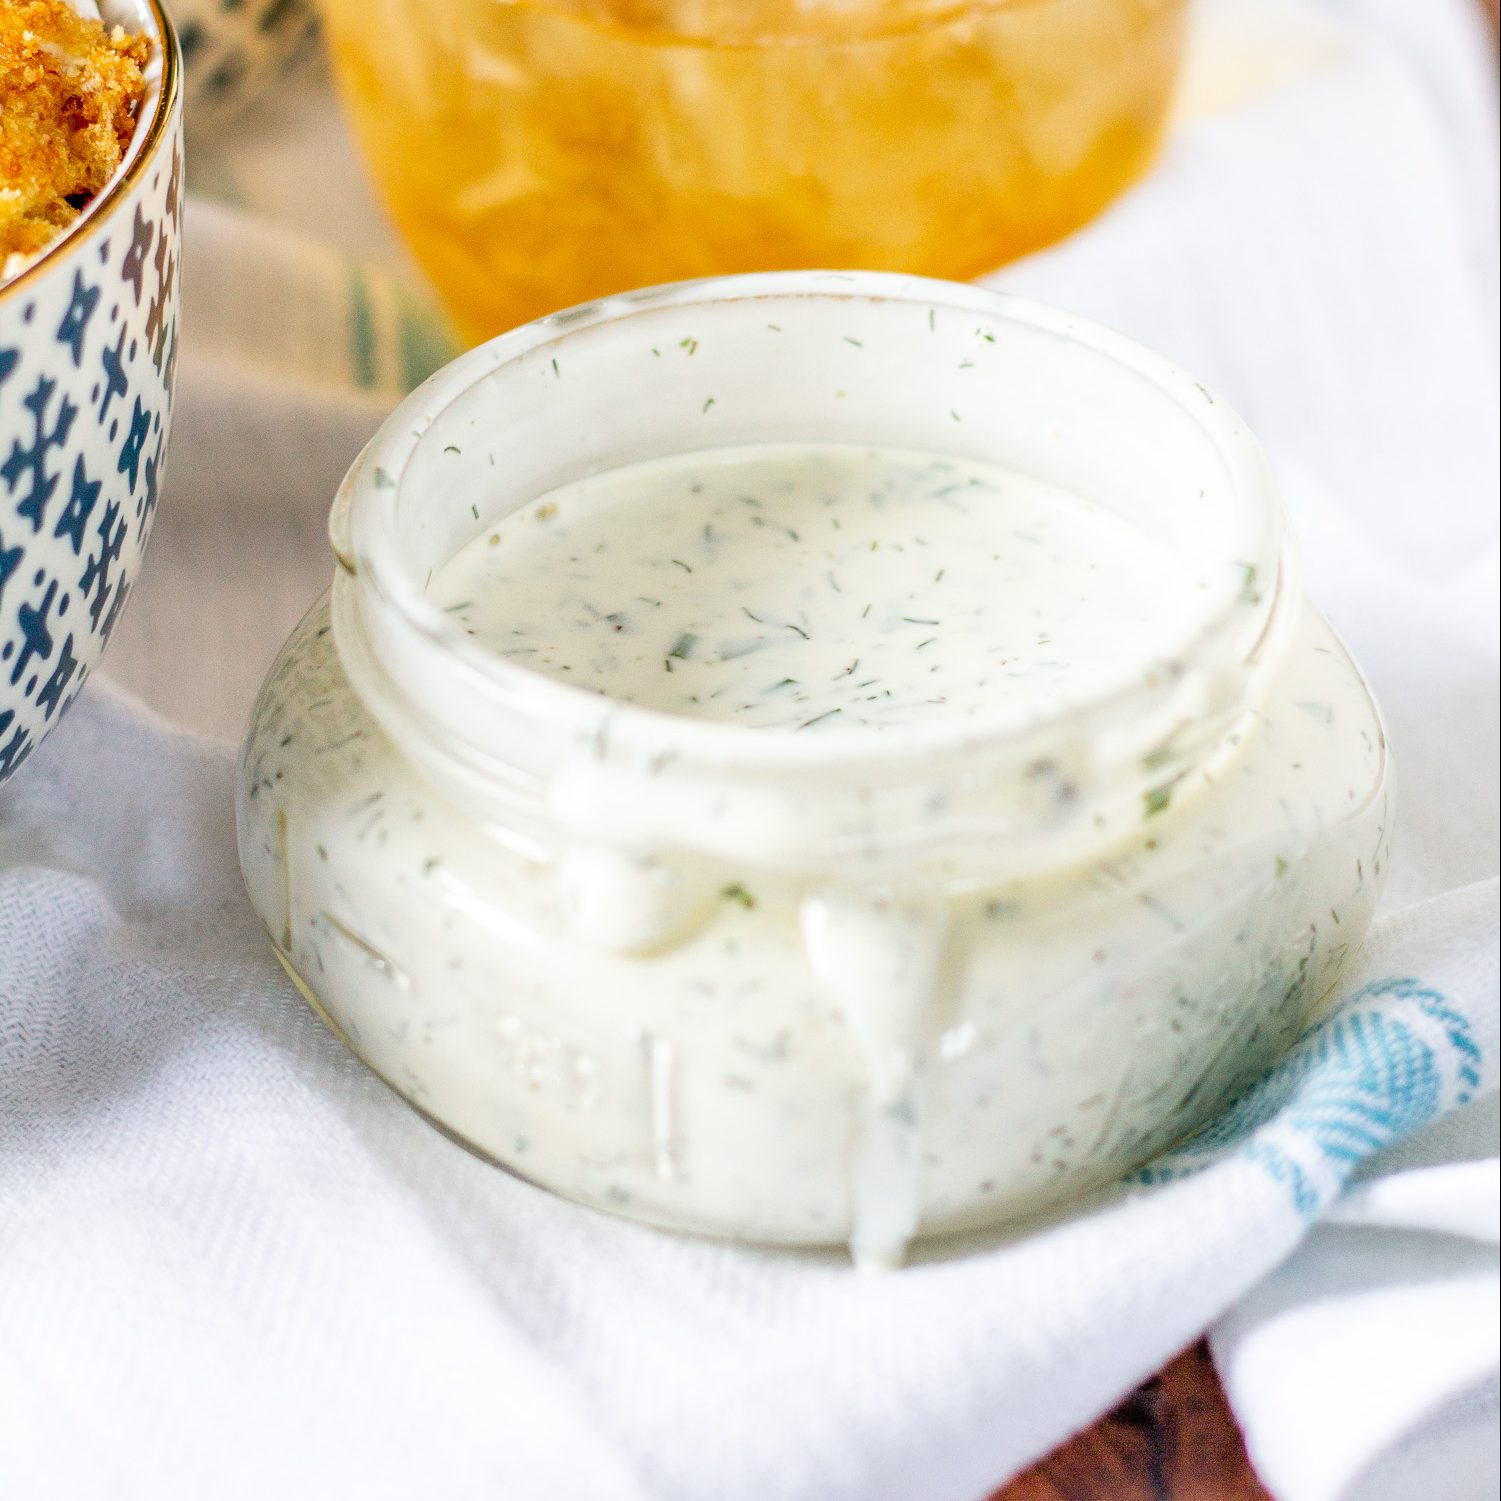 Homemade Ranch Dressing Recipe (The BEST) - Wholesome Yum